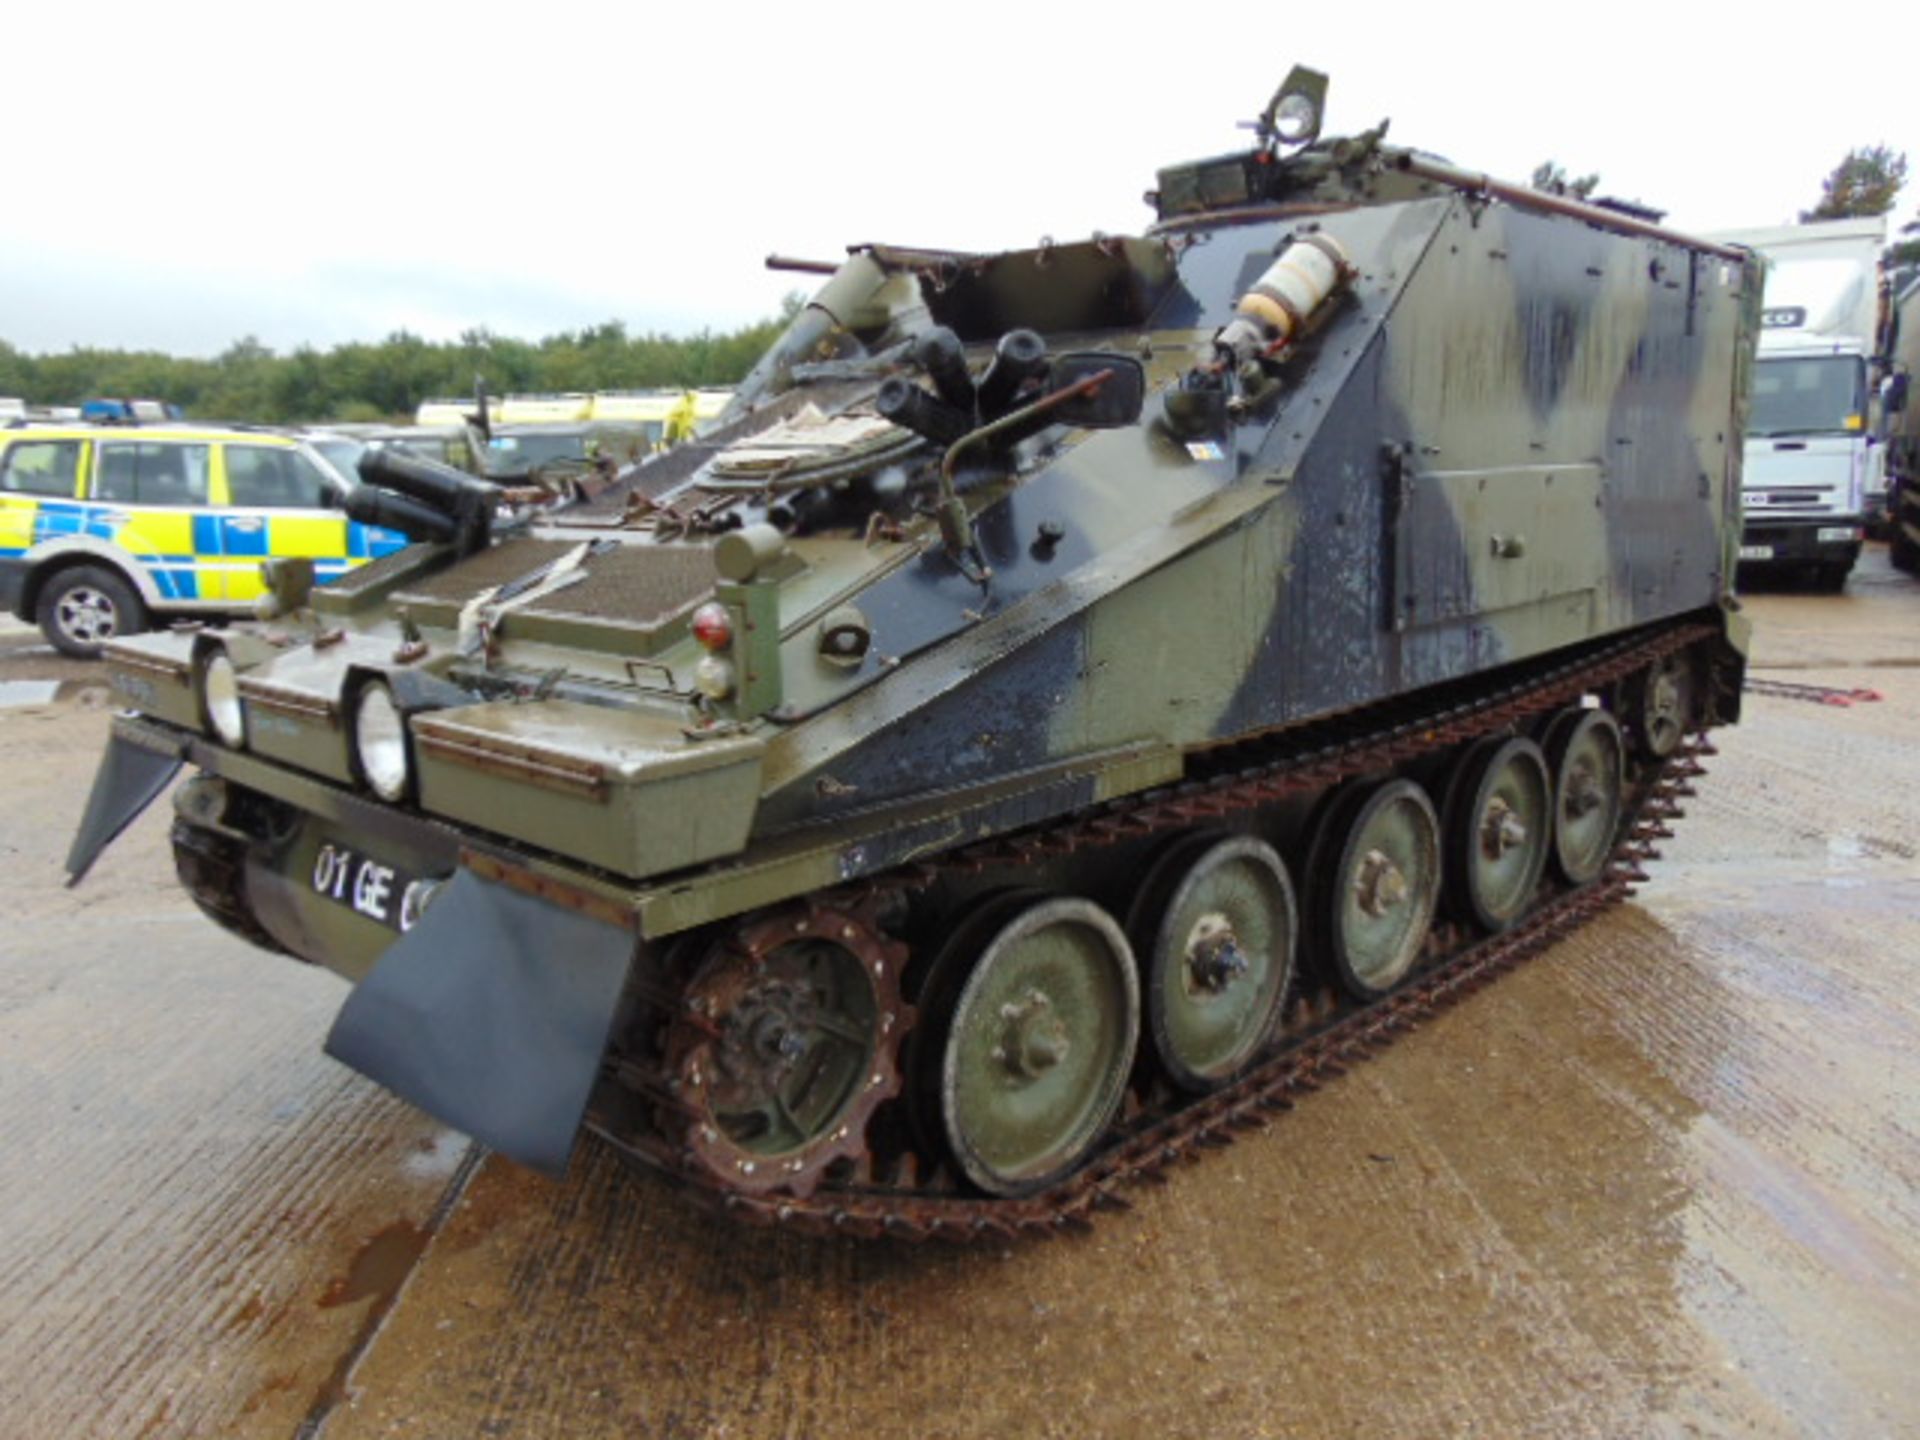 CVRT (Combat Vehicle Reconnaissance Tracked) FV105 Sultan Armoured Personnel Carrier - Image 3 of 30